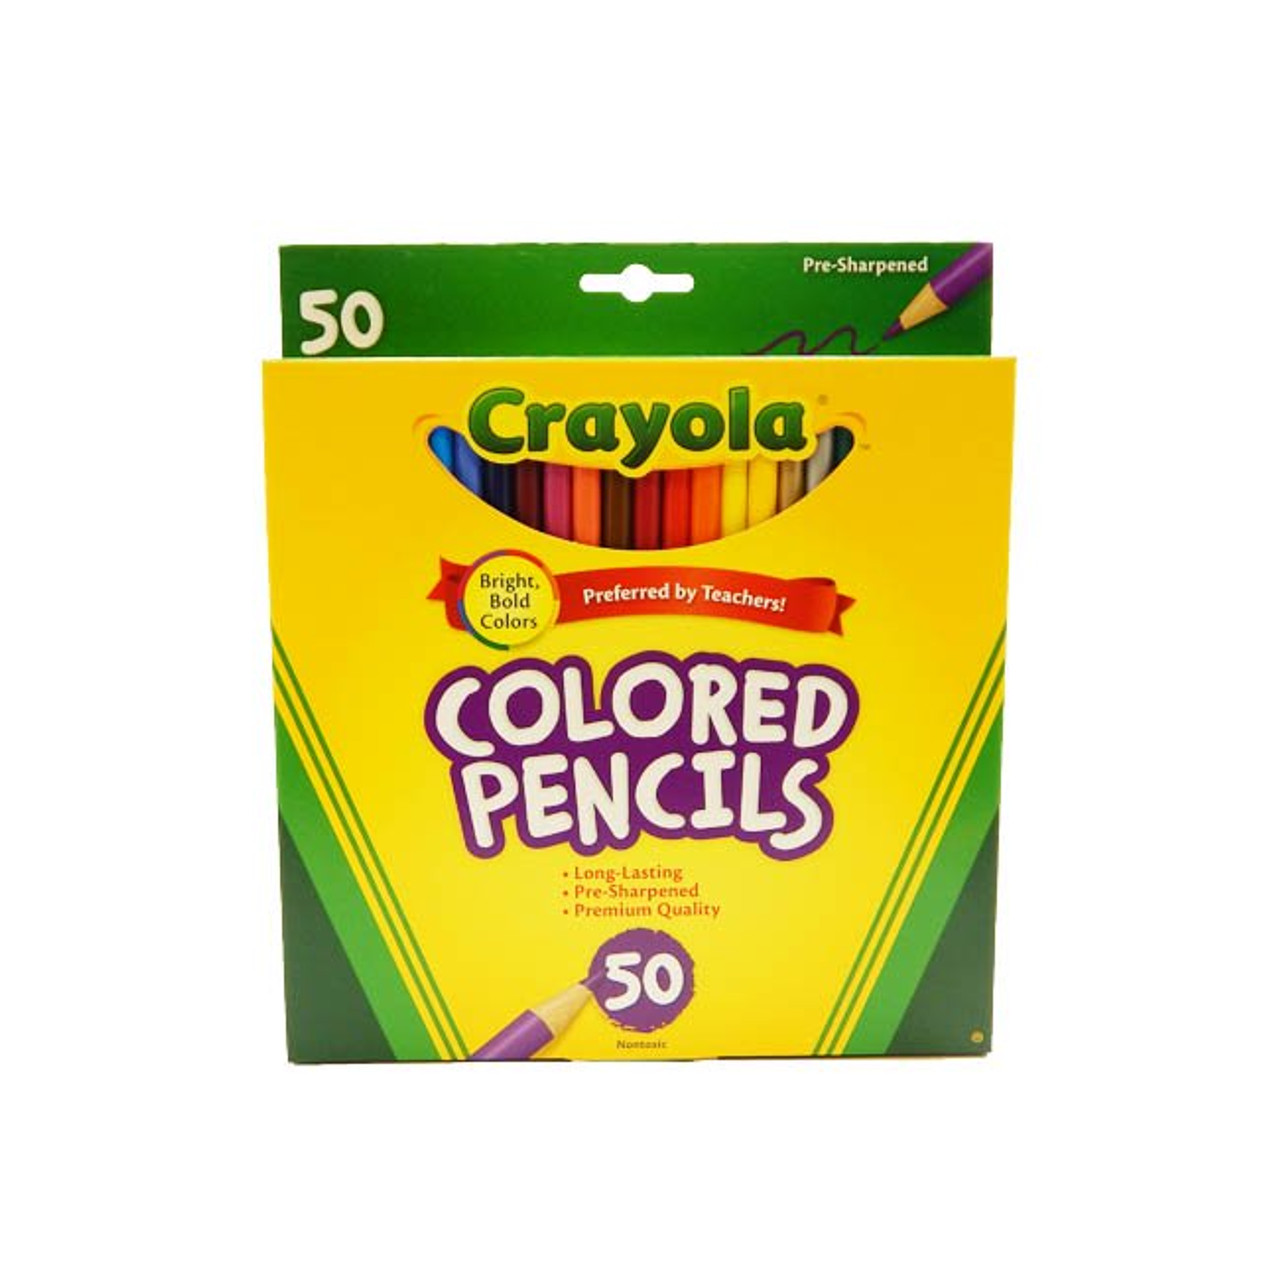 Crayola Colored Pencils, 50 Count, Vibrant Colors, Pre-sharpened